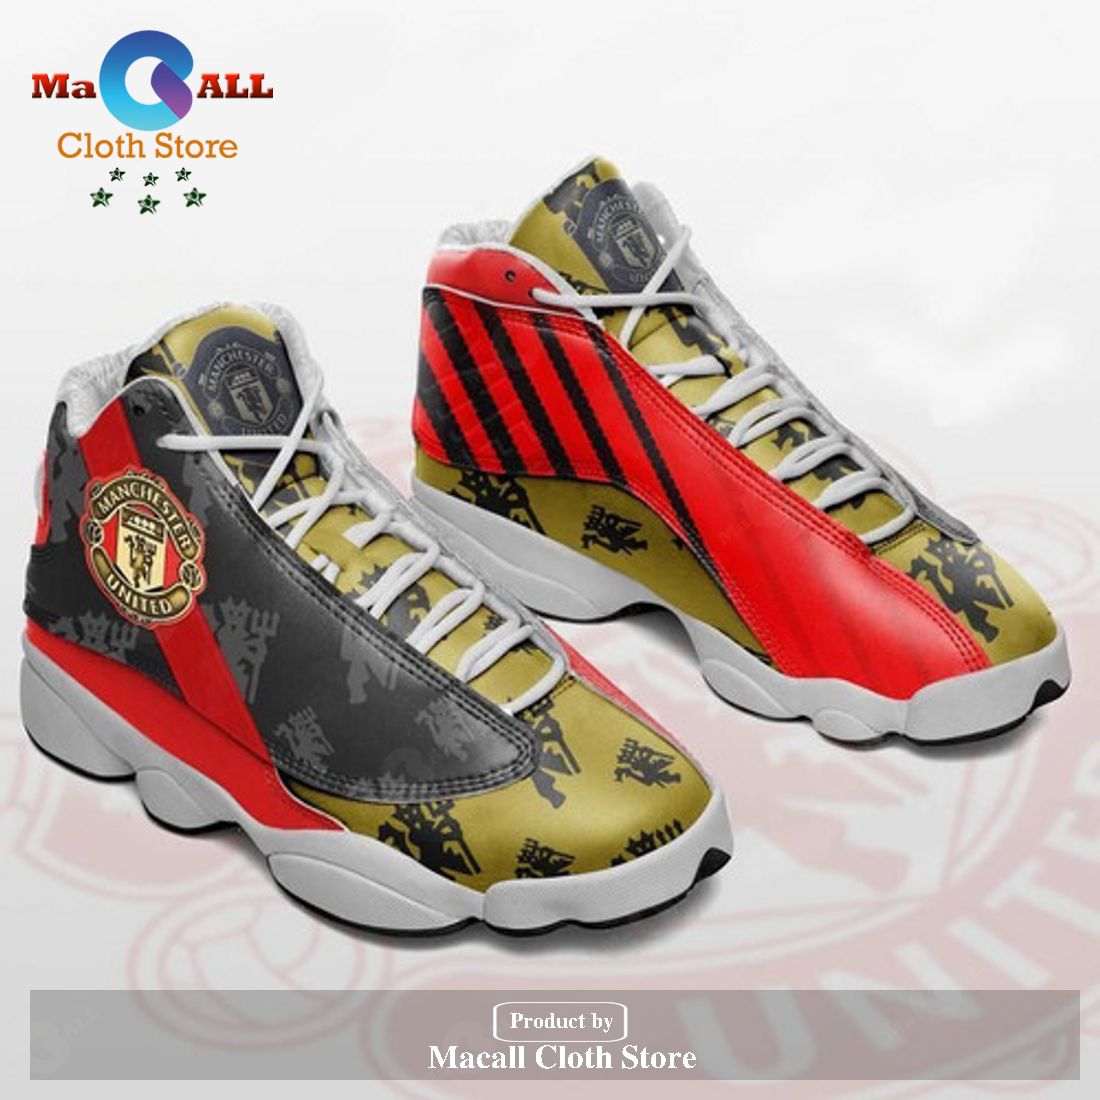 Manchester United Team form AIR Jordan 13 Sneakers - Football Team Gift  Shoes For Fan POD Design - Macall Cloth Store - Destination for fashionistas